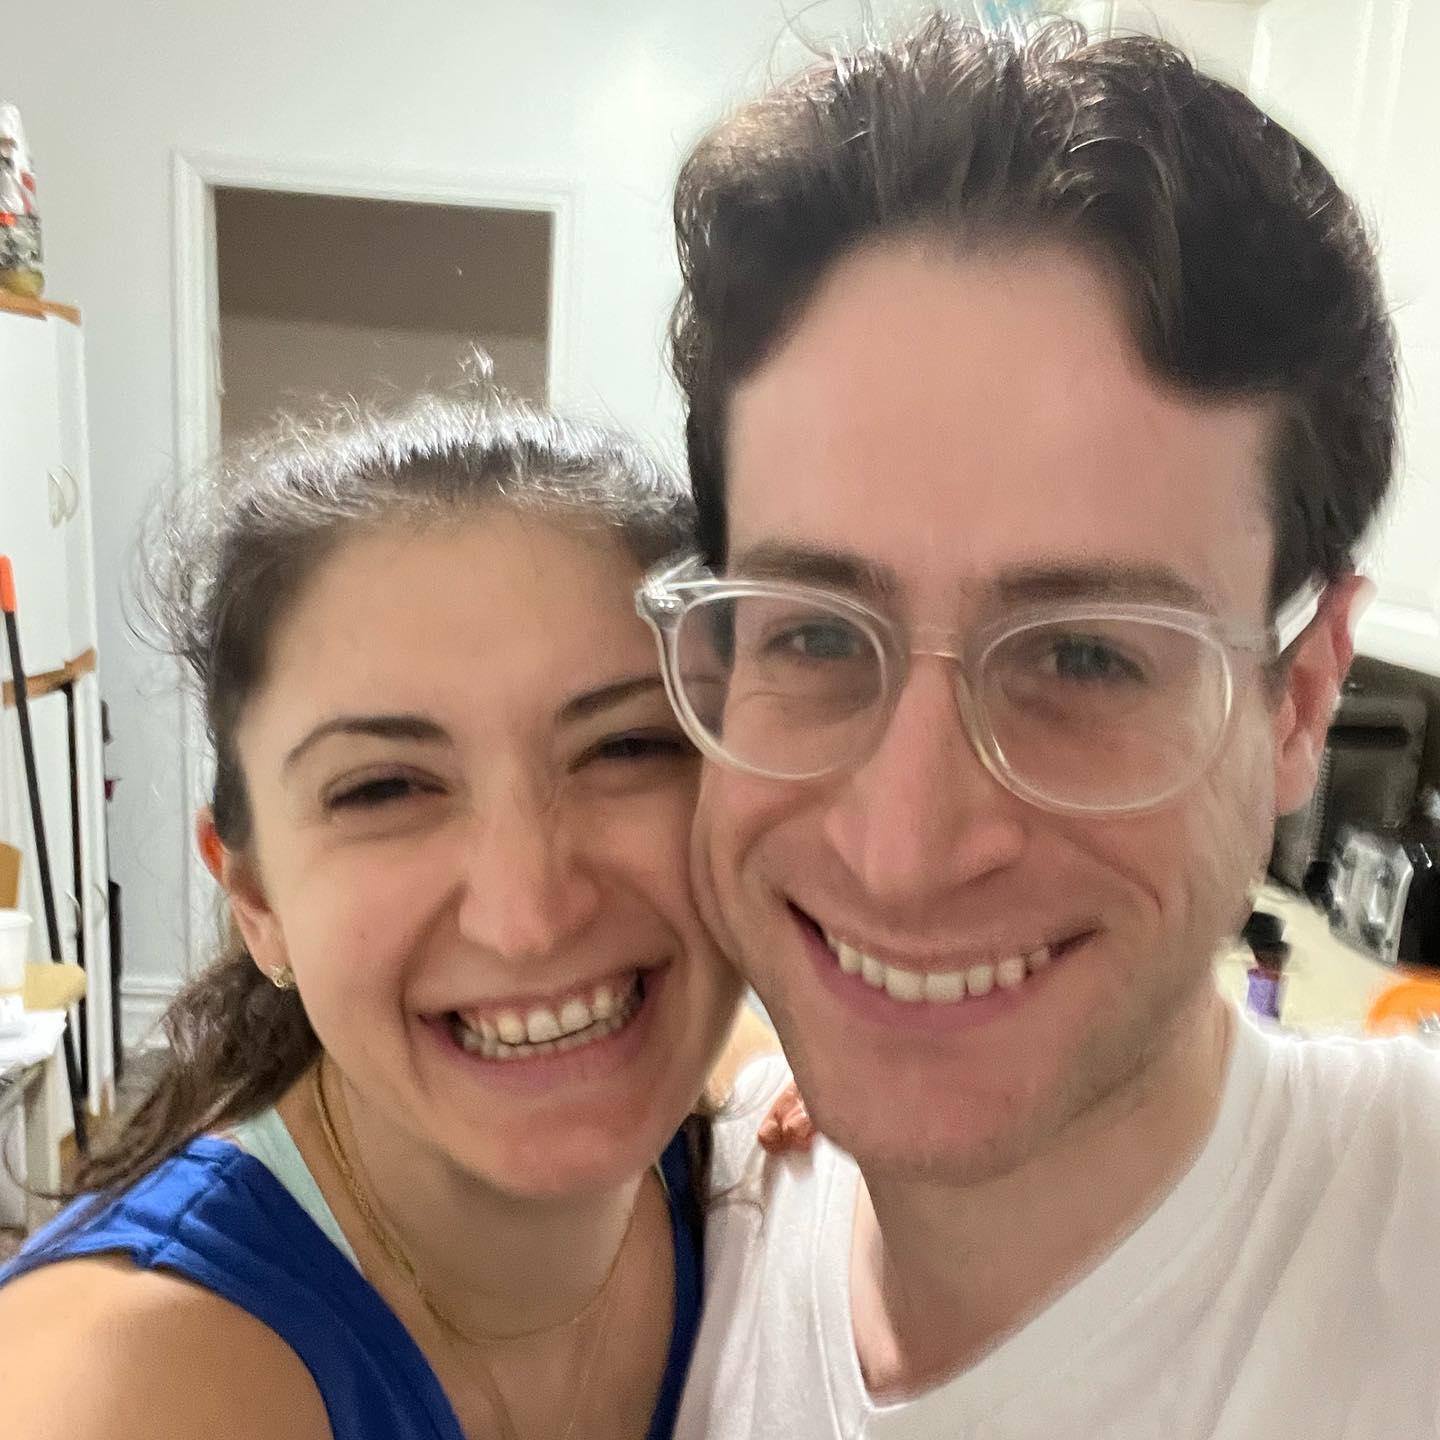 Our first EVER photo! 
While cooking for Shabbat